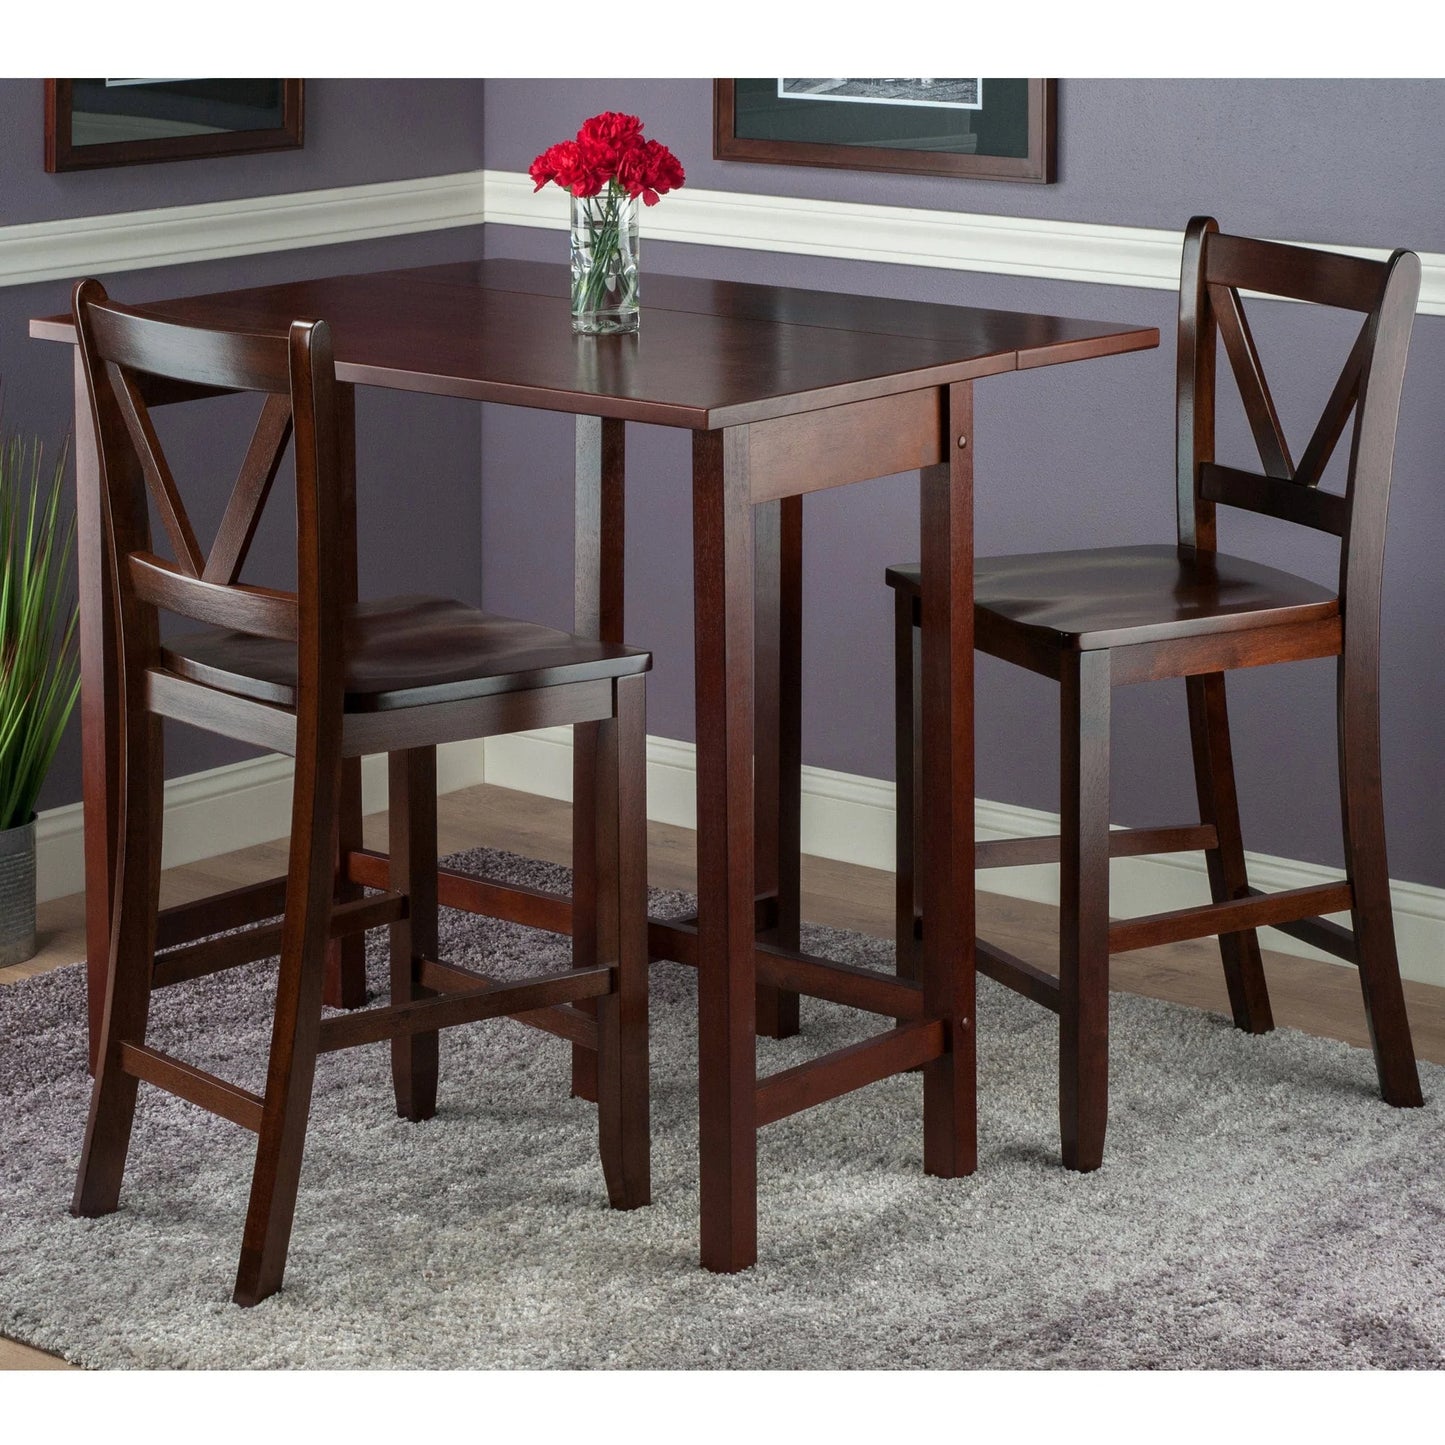 WINSOME Pub Table Set Lynnwood 3-Pc Drop Leaf Table with V-Back Counter Stools, Walnut